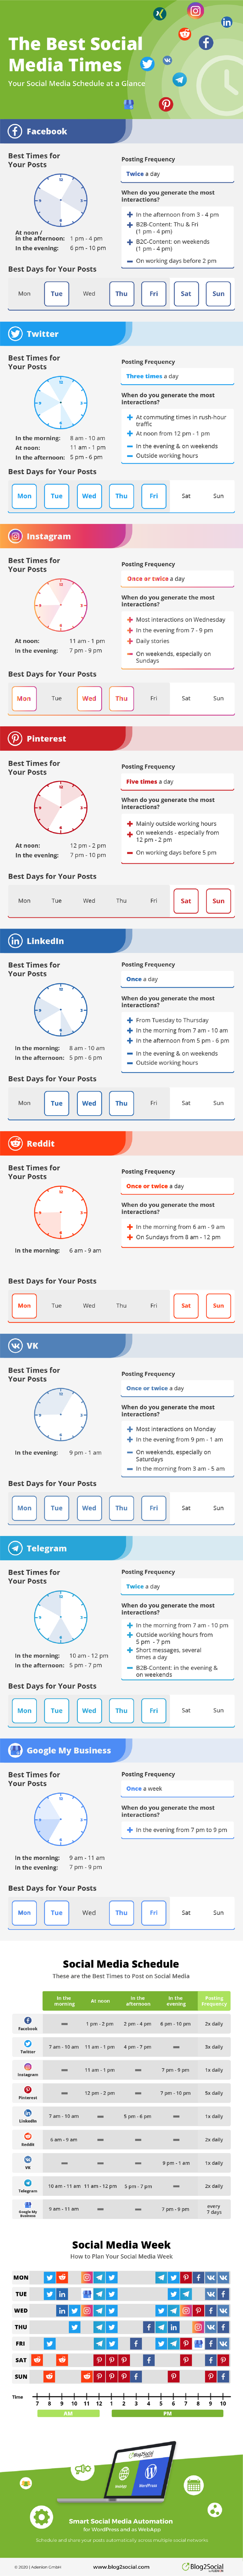 Social Media Auto-Posting and Scheduling Plugin for WordPress Blogs #infographic